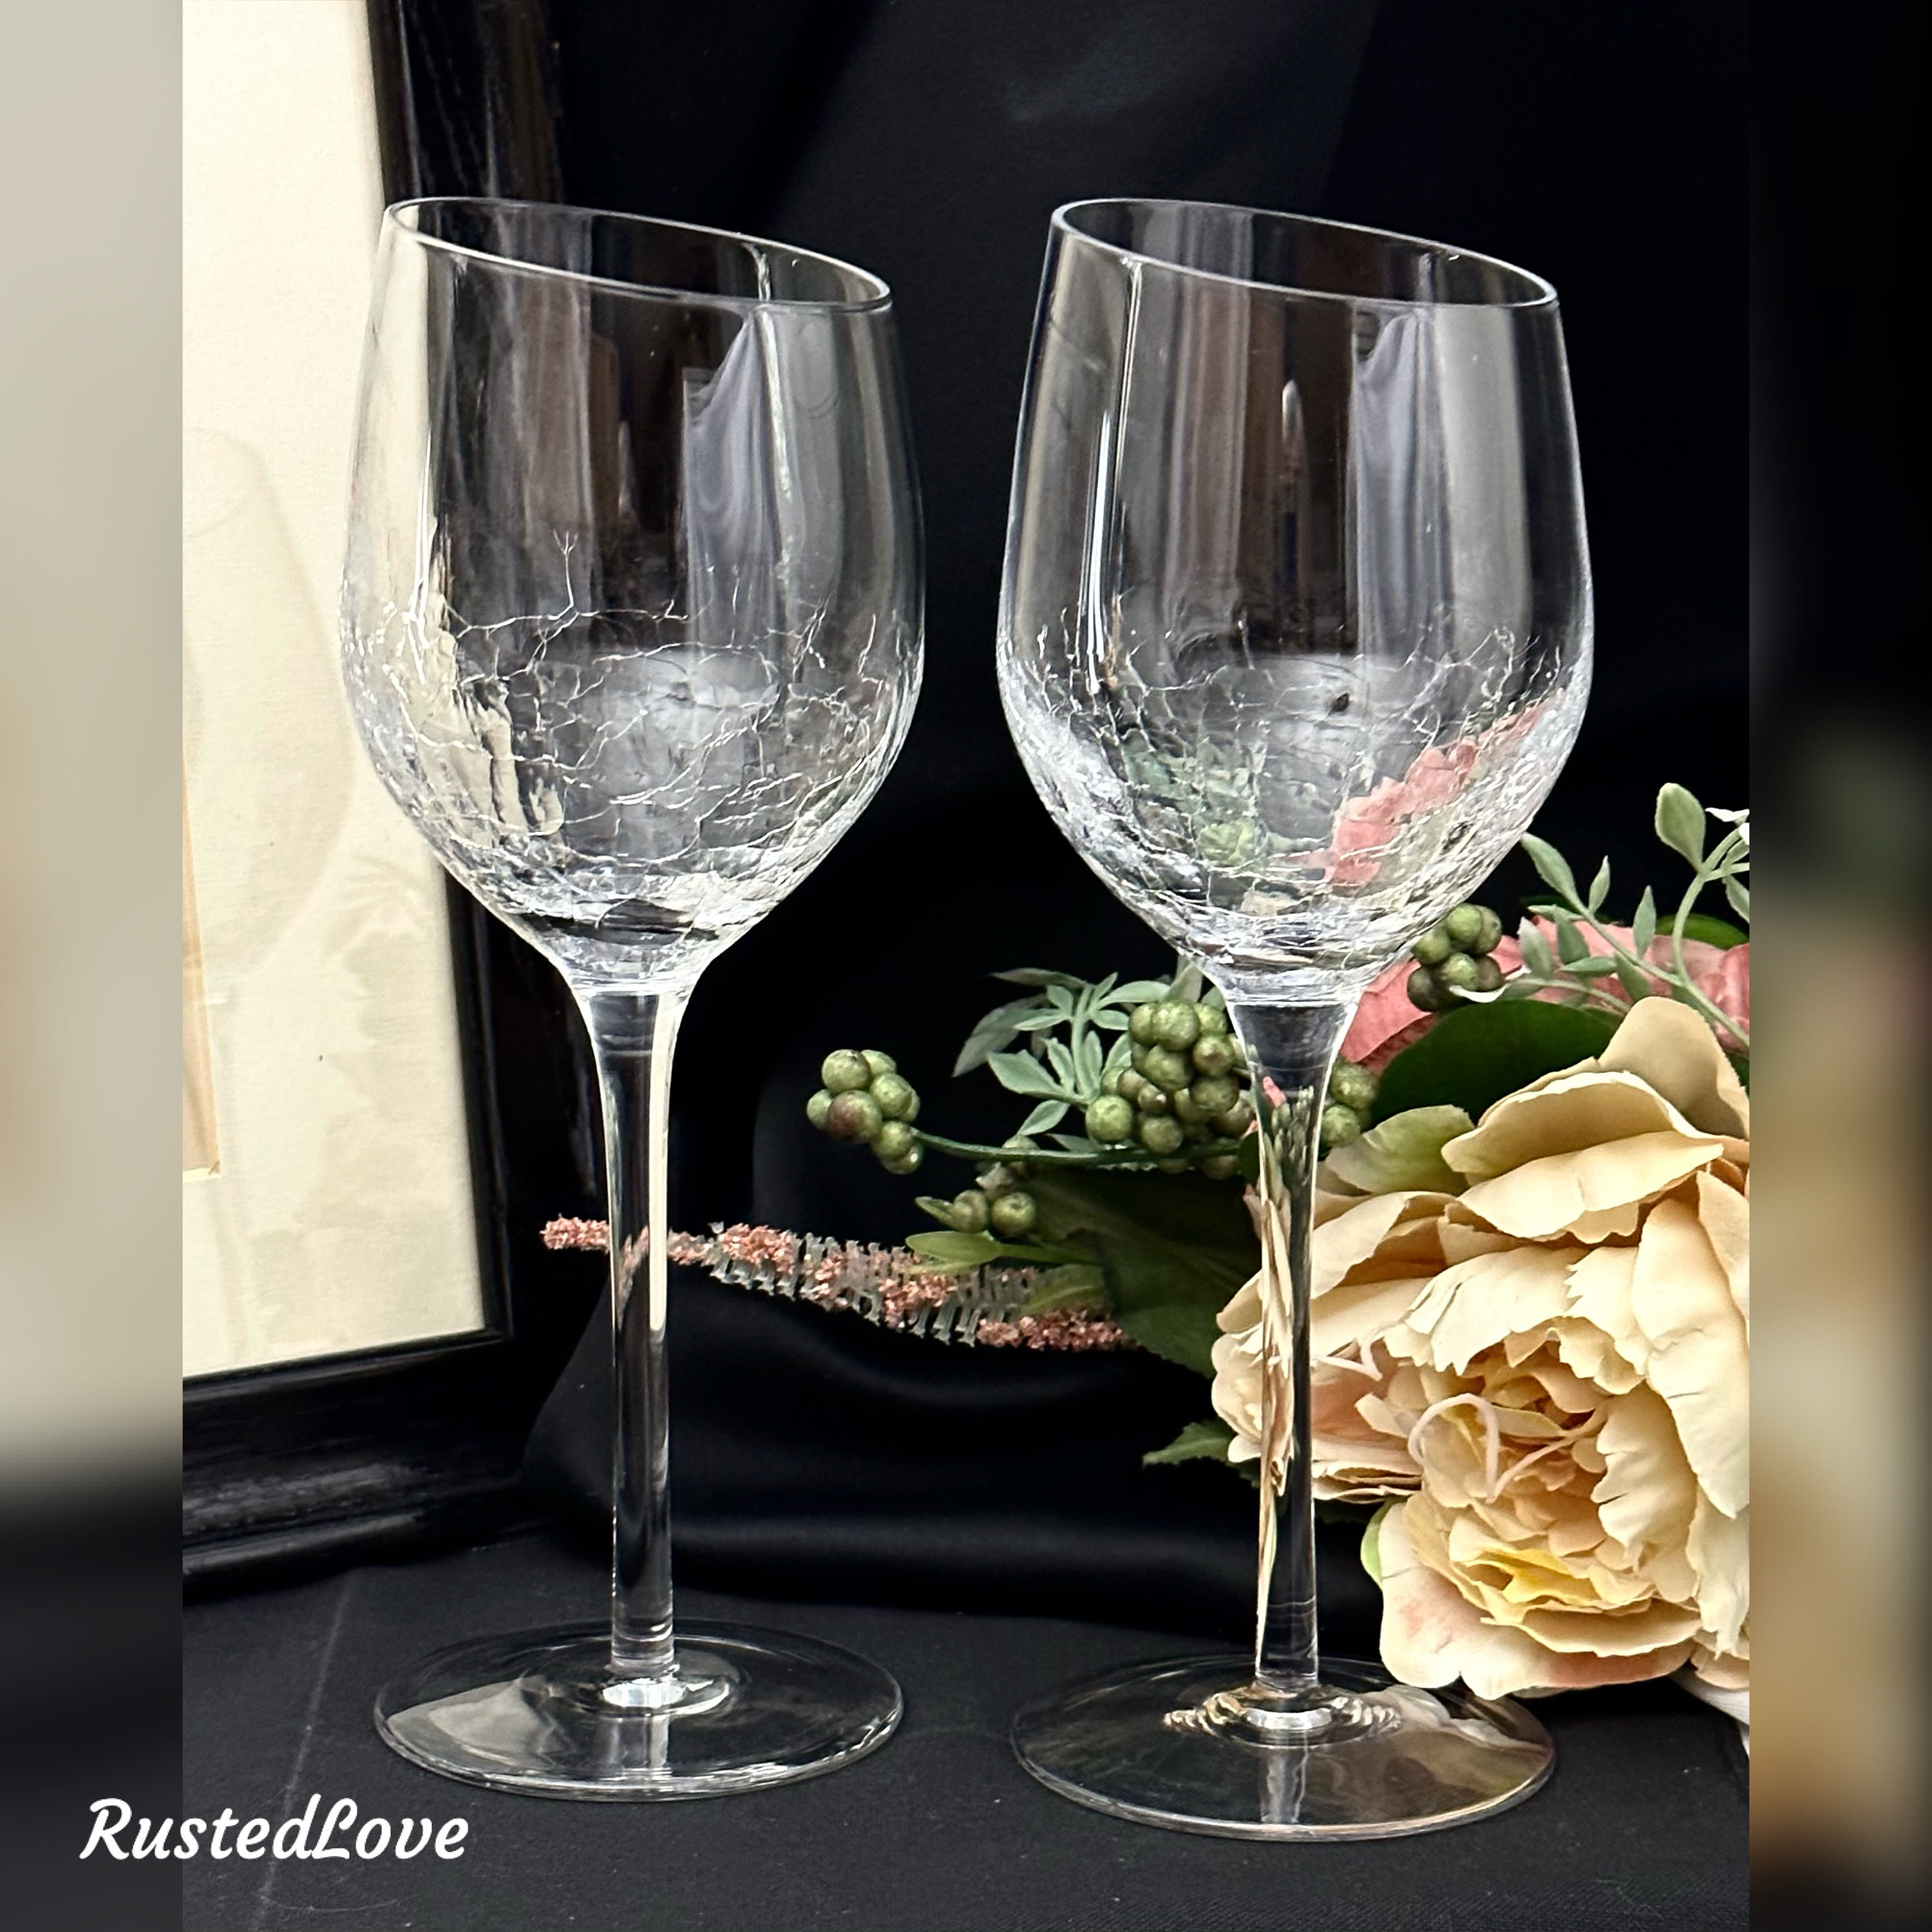 3) Pier 1 Crystal Crackle Wine Glasses, 2 Red Wine, 1 White Wine